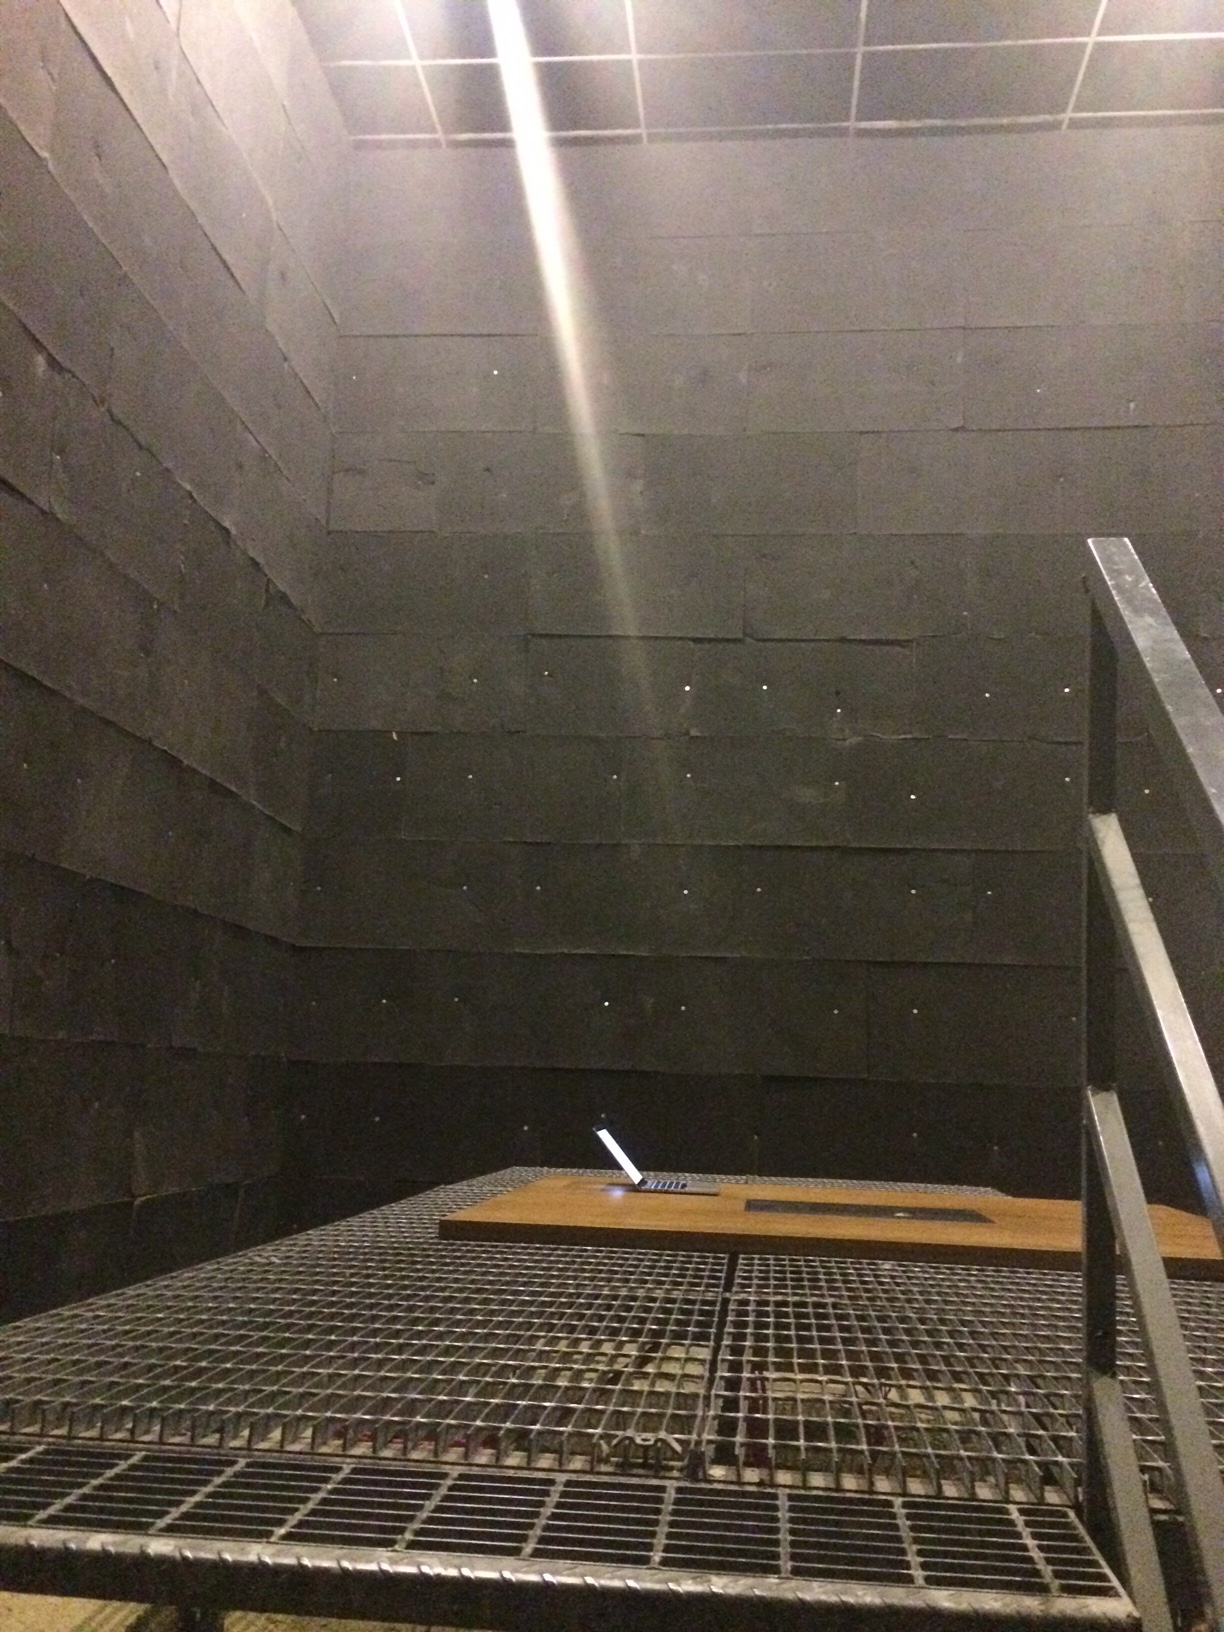 Derick's interview location in the anechoic chamber